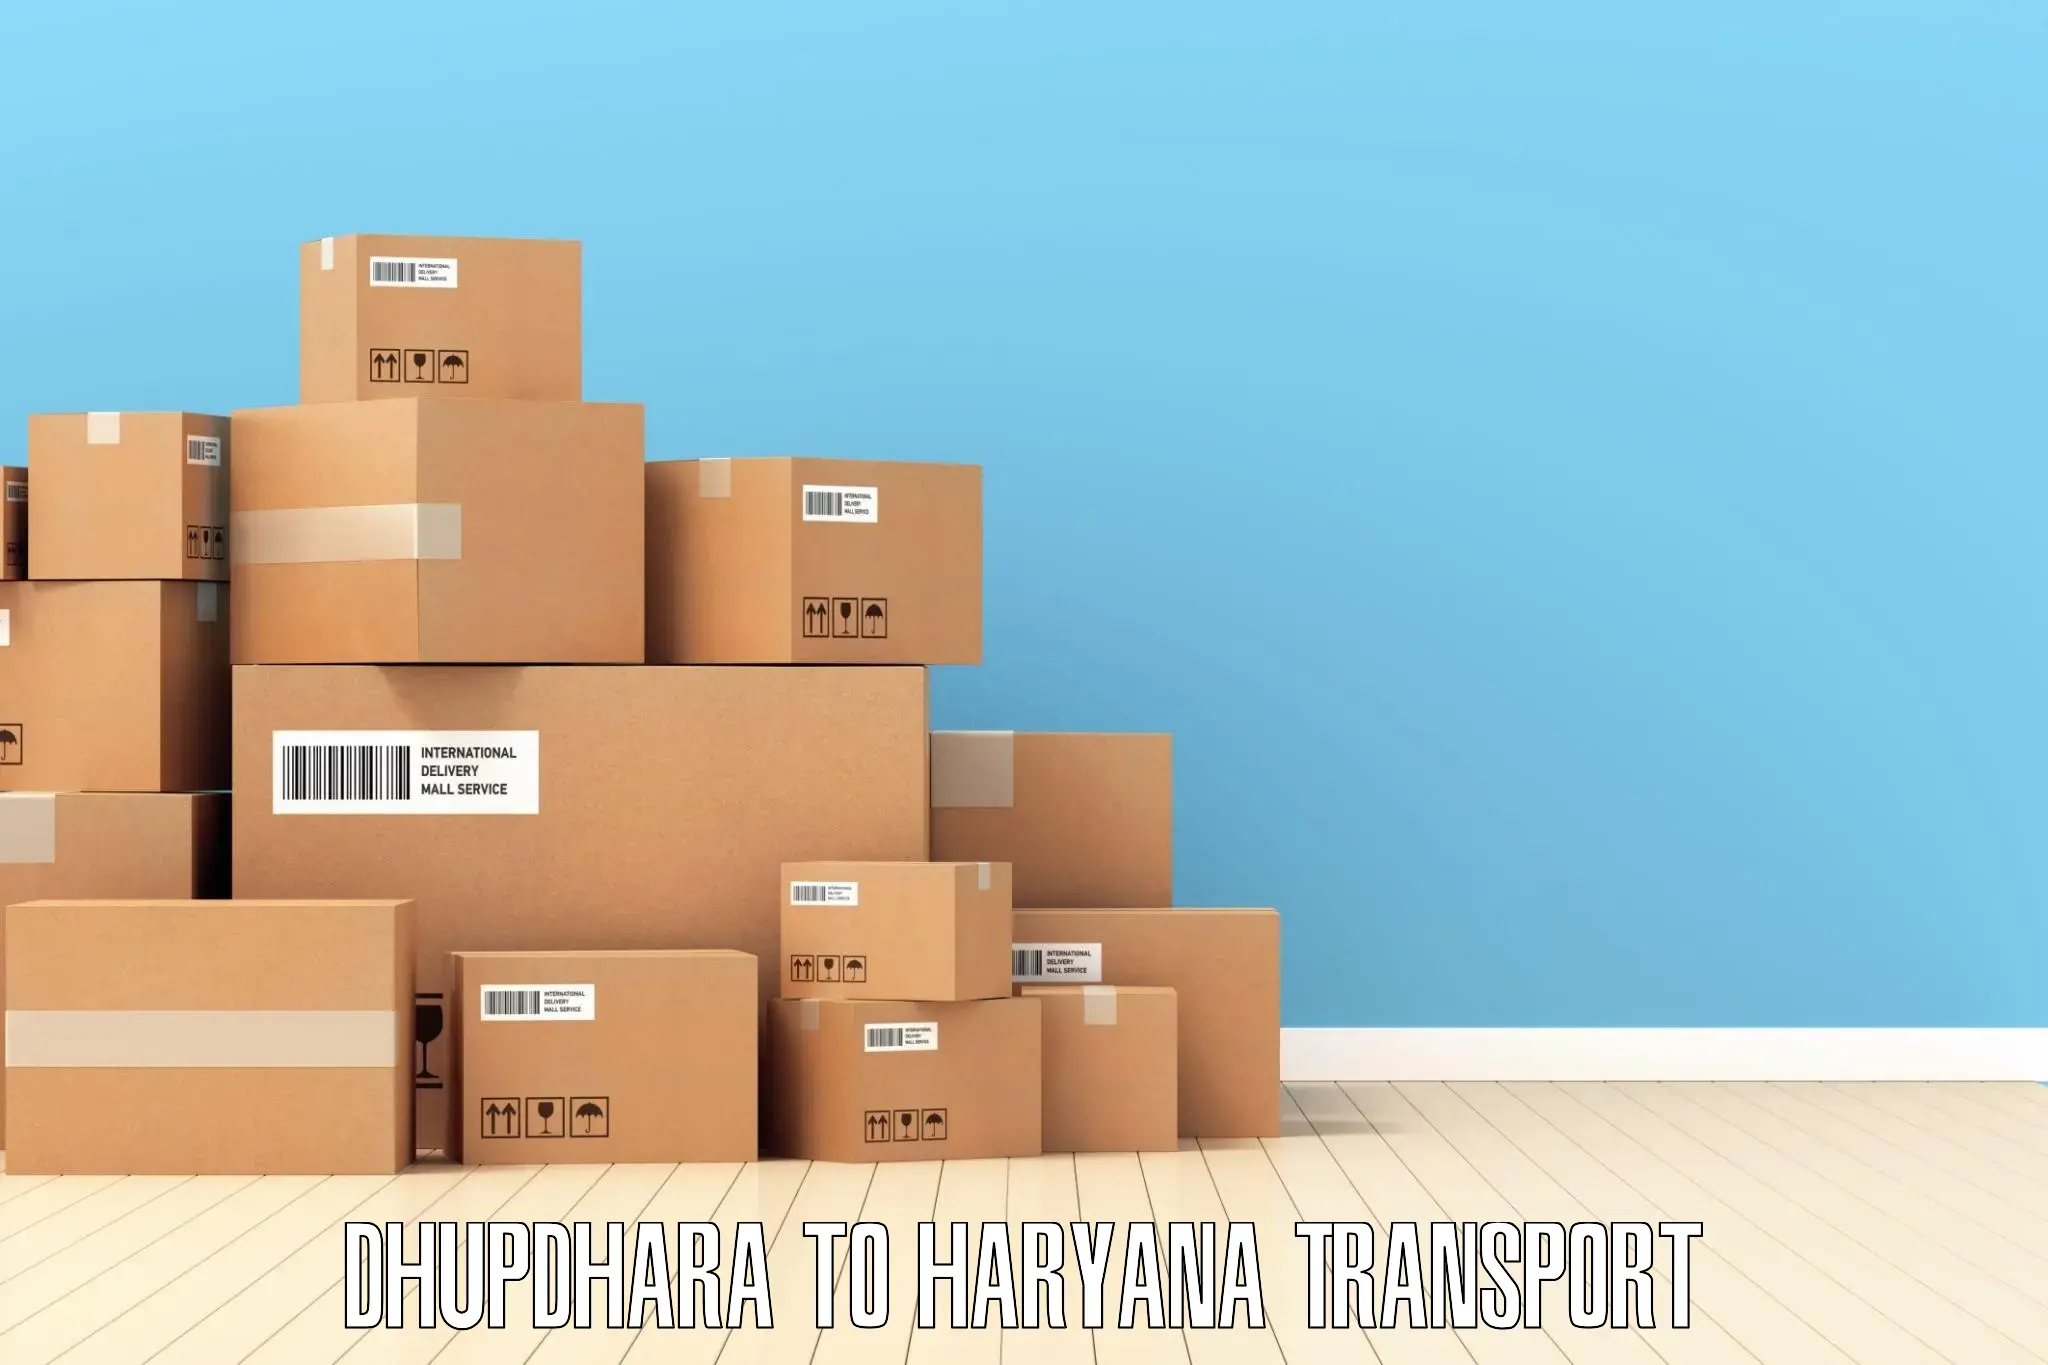 Commercial transport service Dhupdhara to Gurgaon